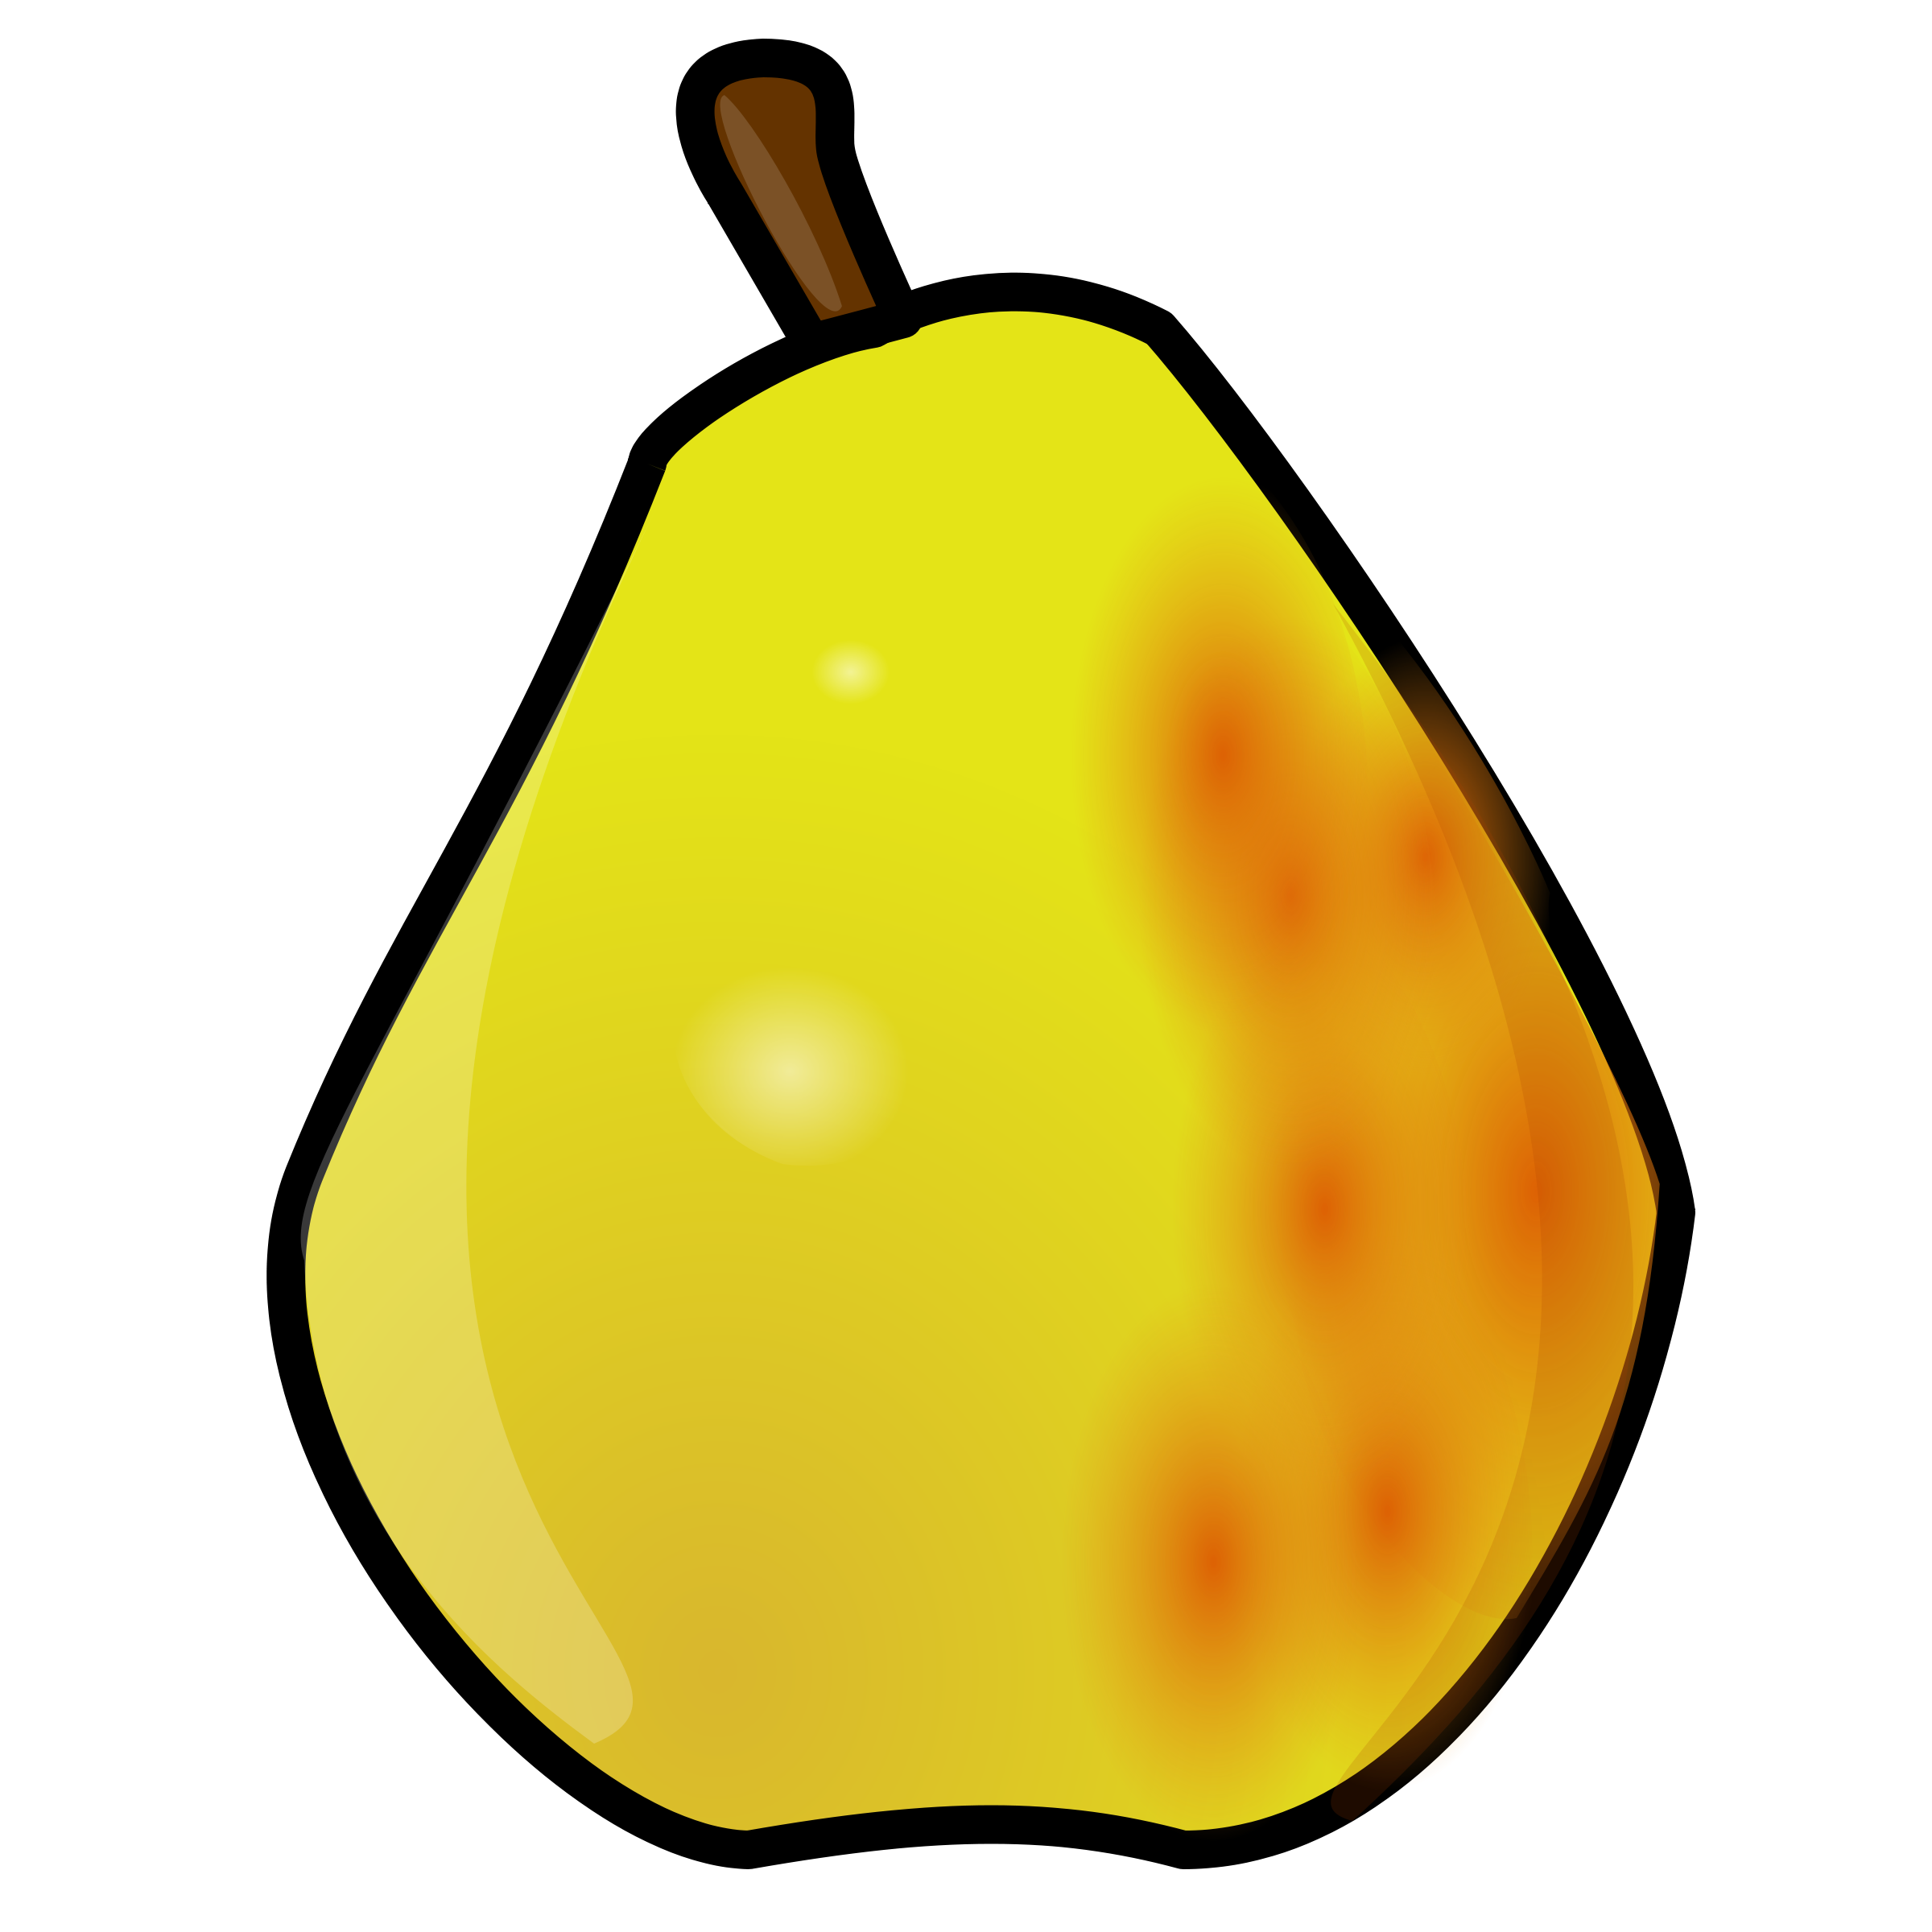 Pear 4606 | Clipart library - Free Clipart Images